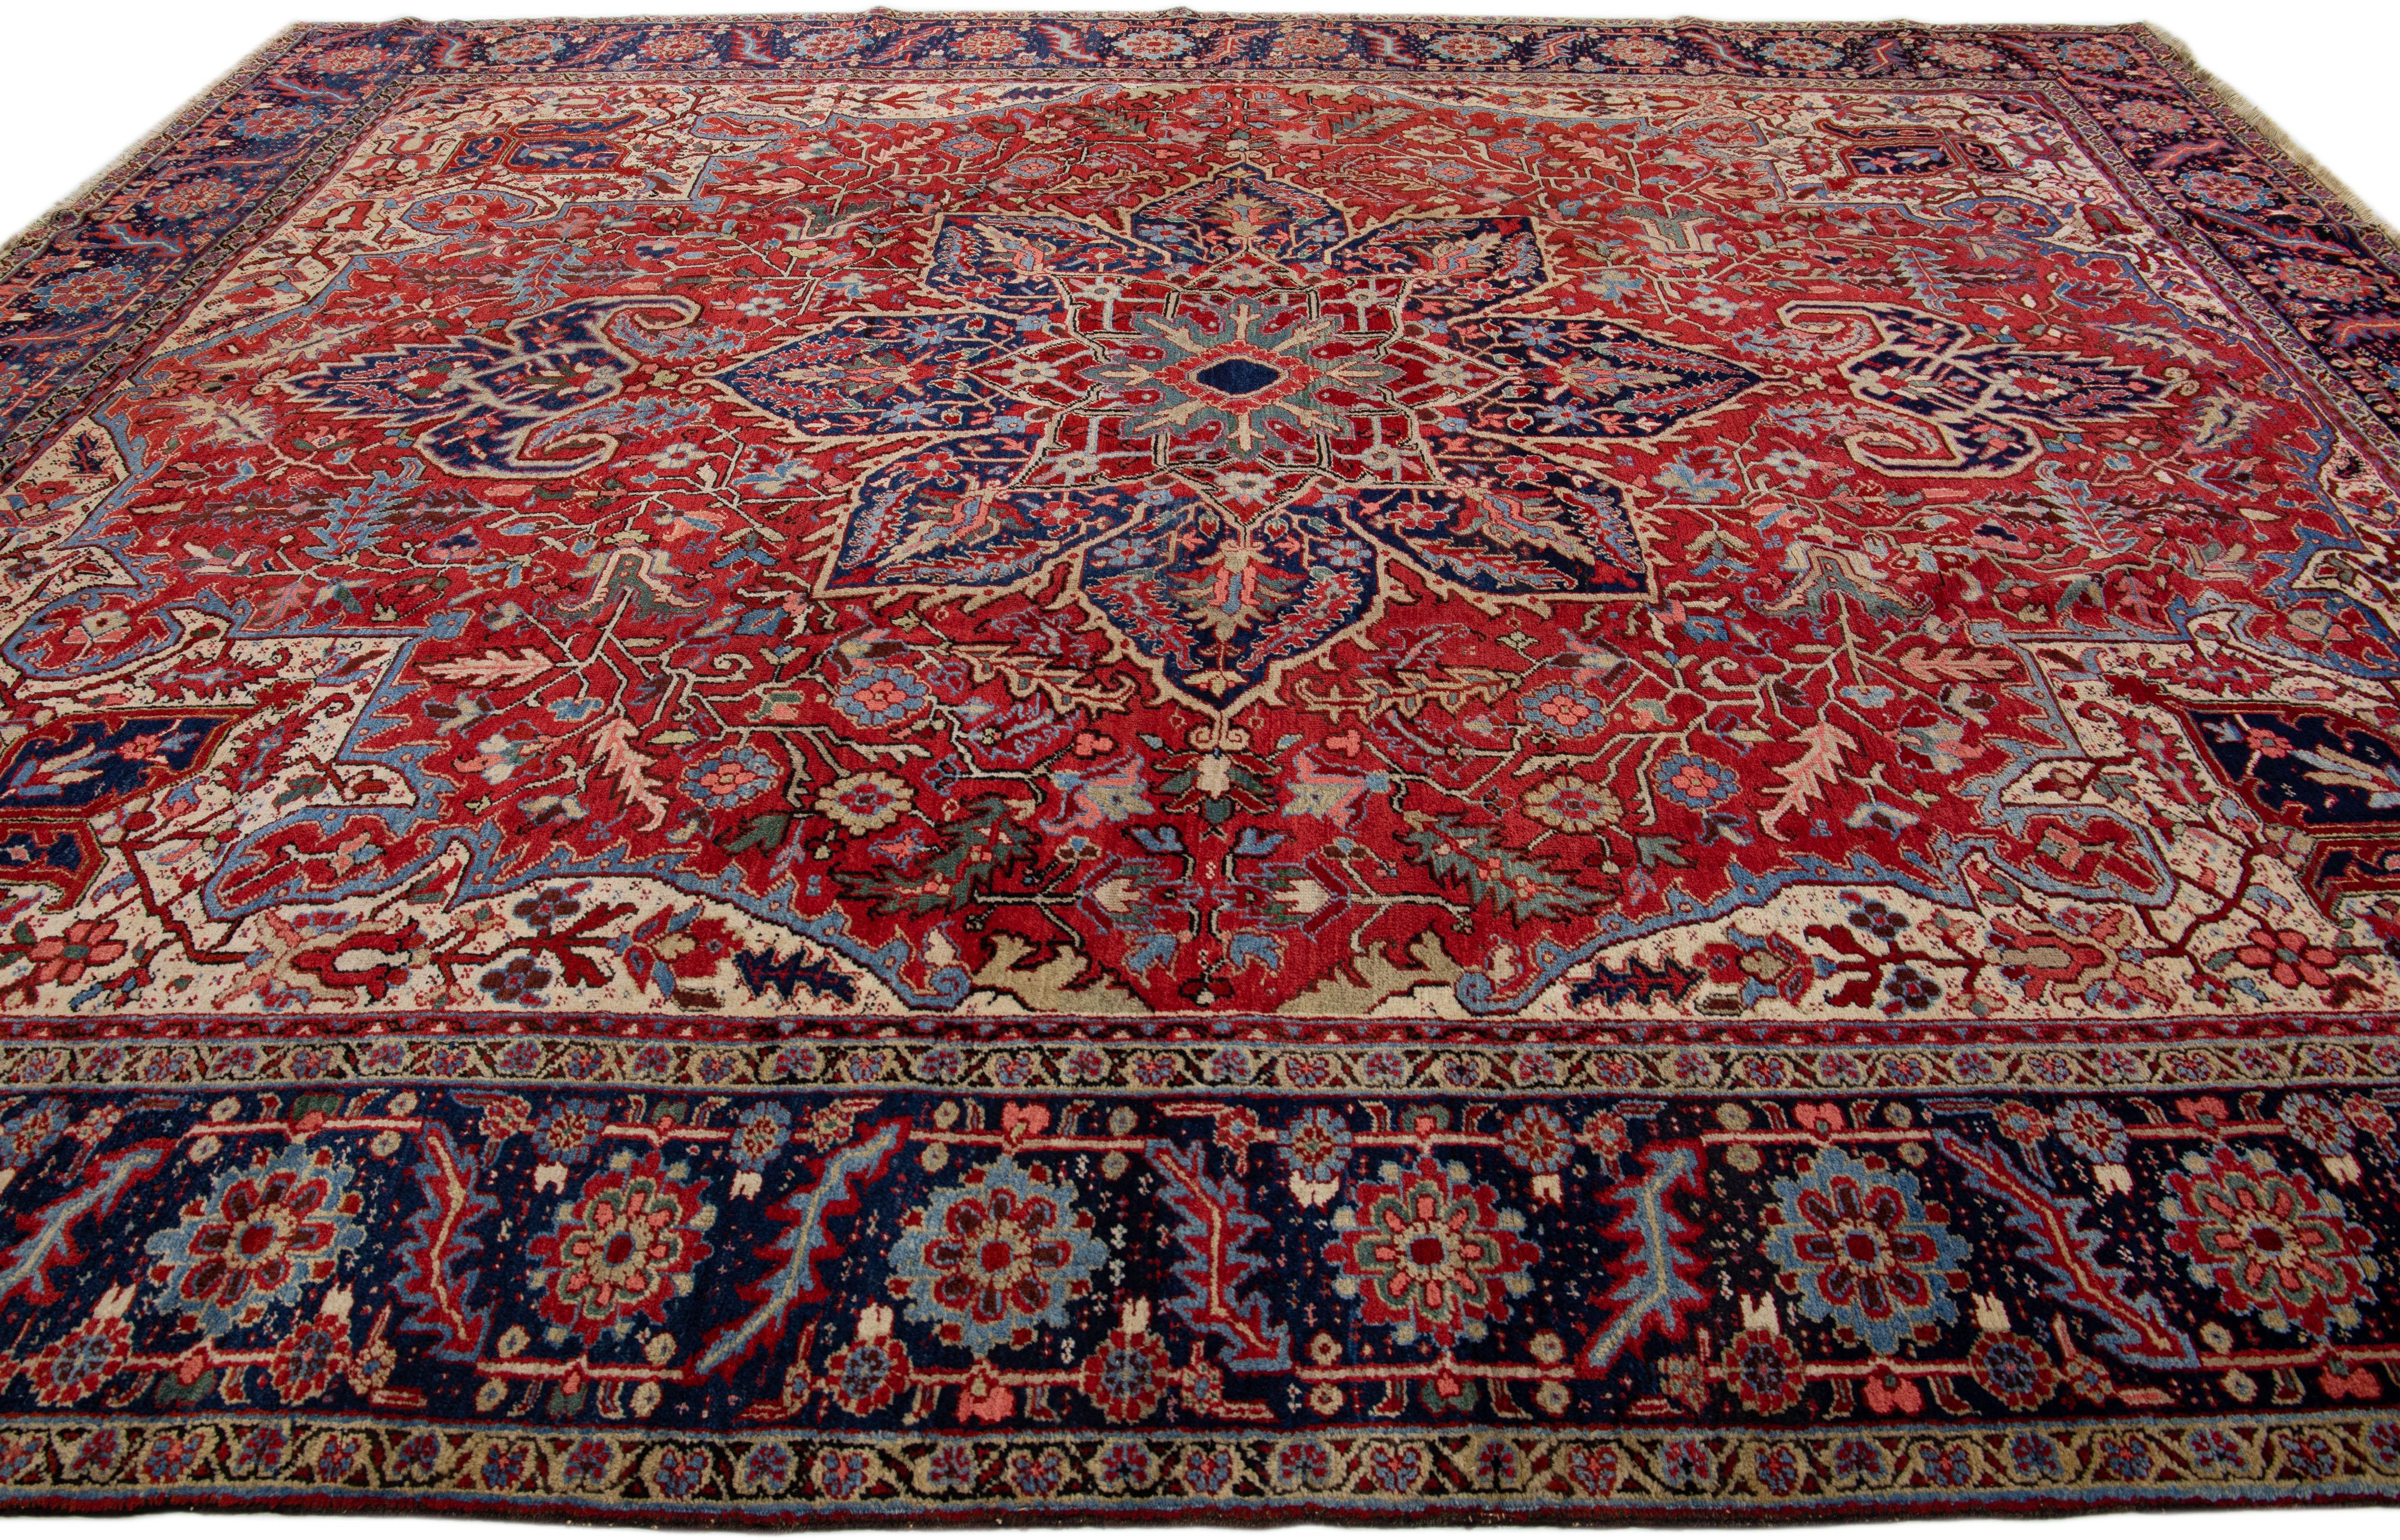 20th Century Antique Persian Heriz Red Handmade Wool Rug With Multicolor Medallion Motif For Sale